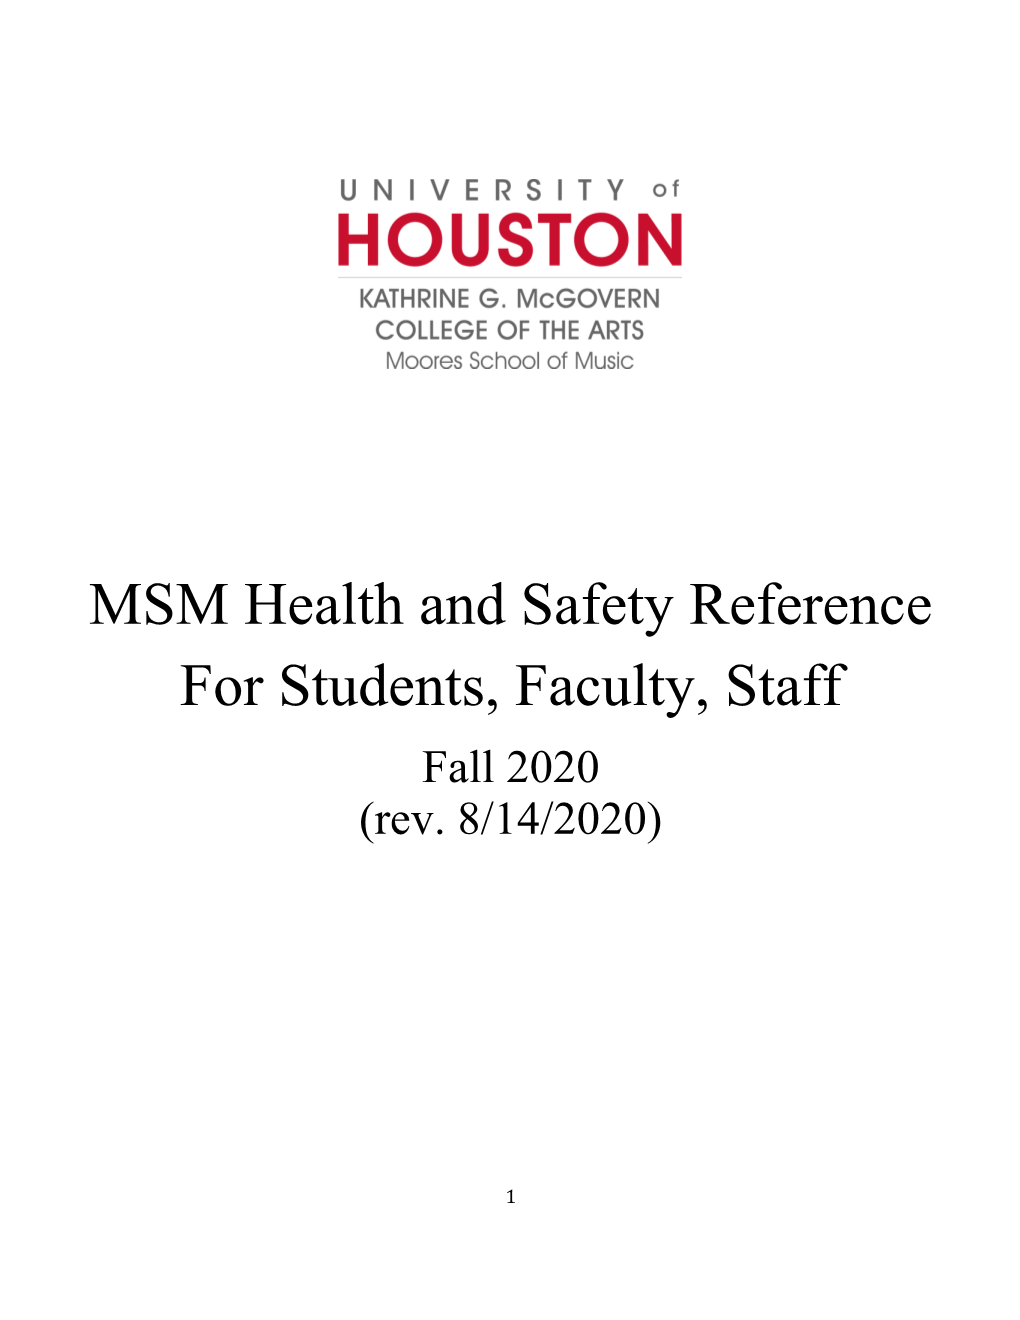 MSM Health and Safety Reference Manual